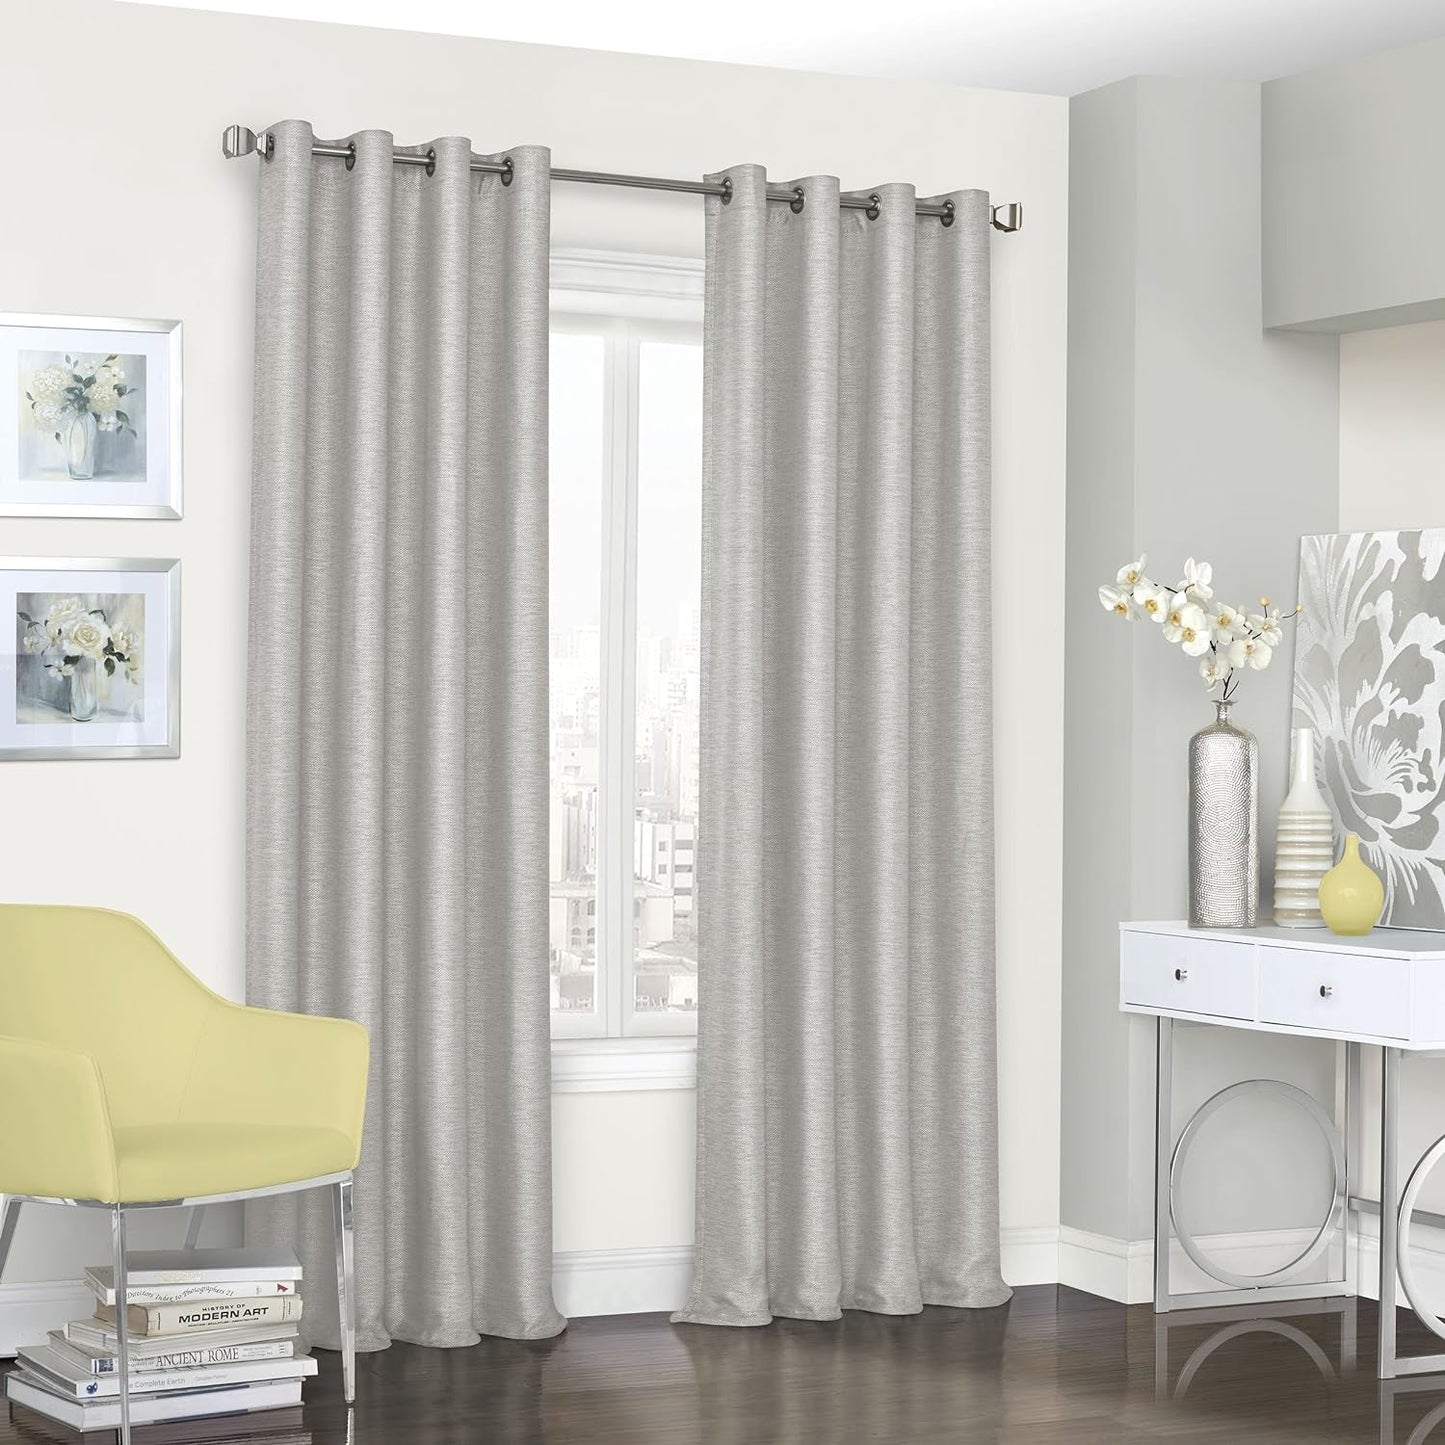 Eclipse Trevi Short Valance Small Window Curtains Bathroom, Living Room and Kitchens, 52" X 18", Natural